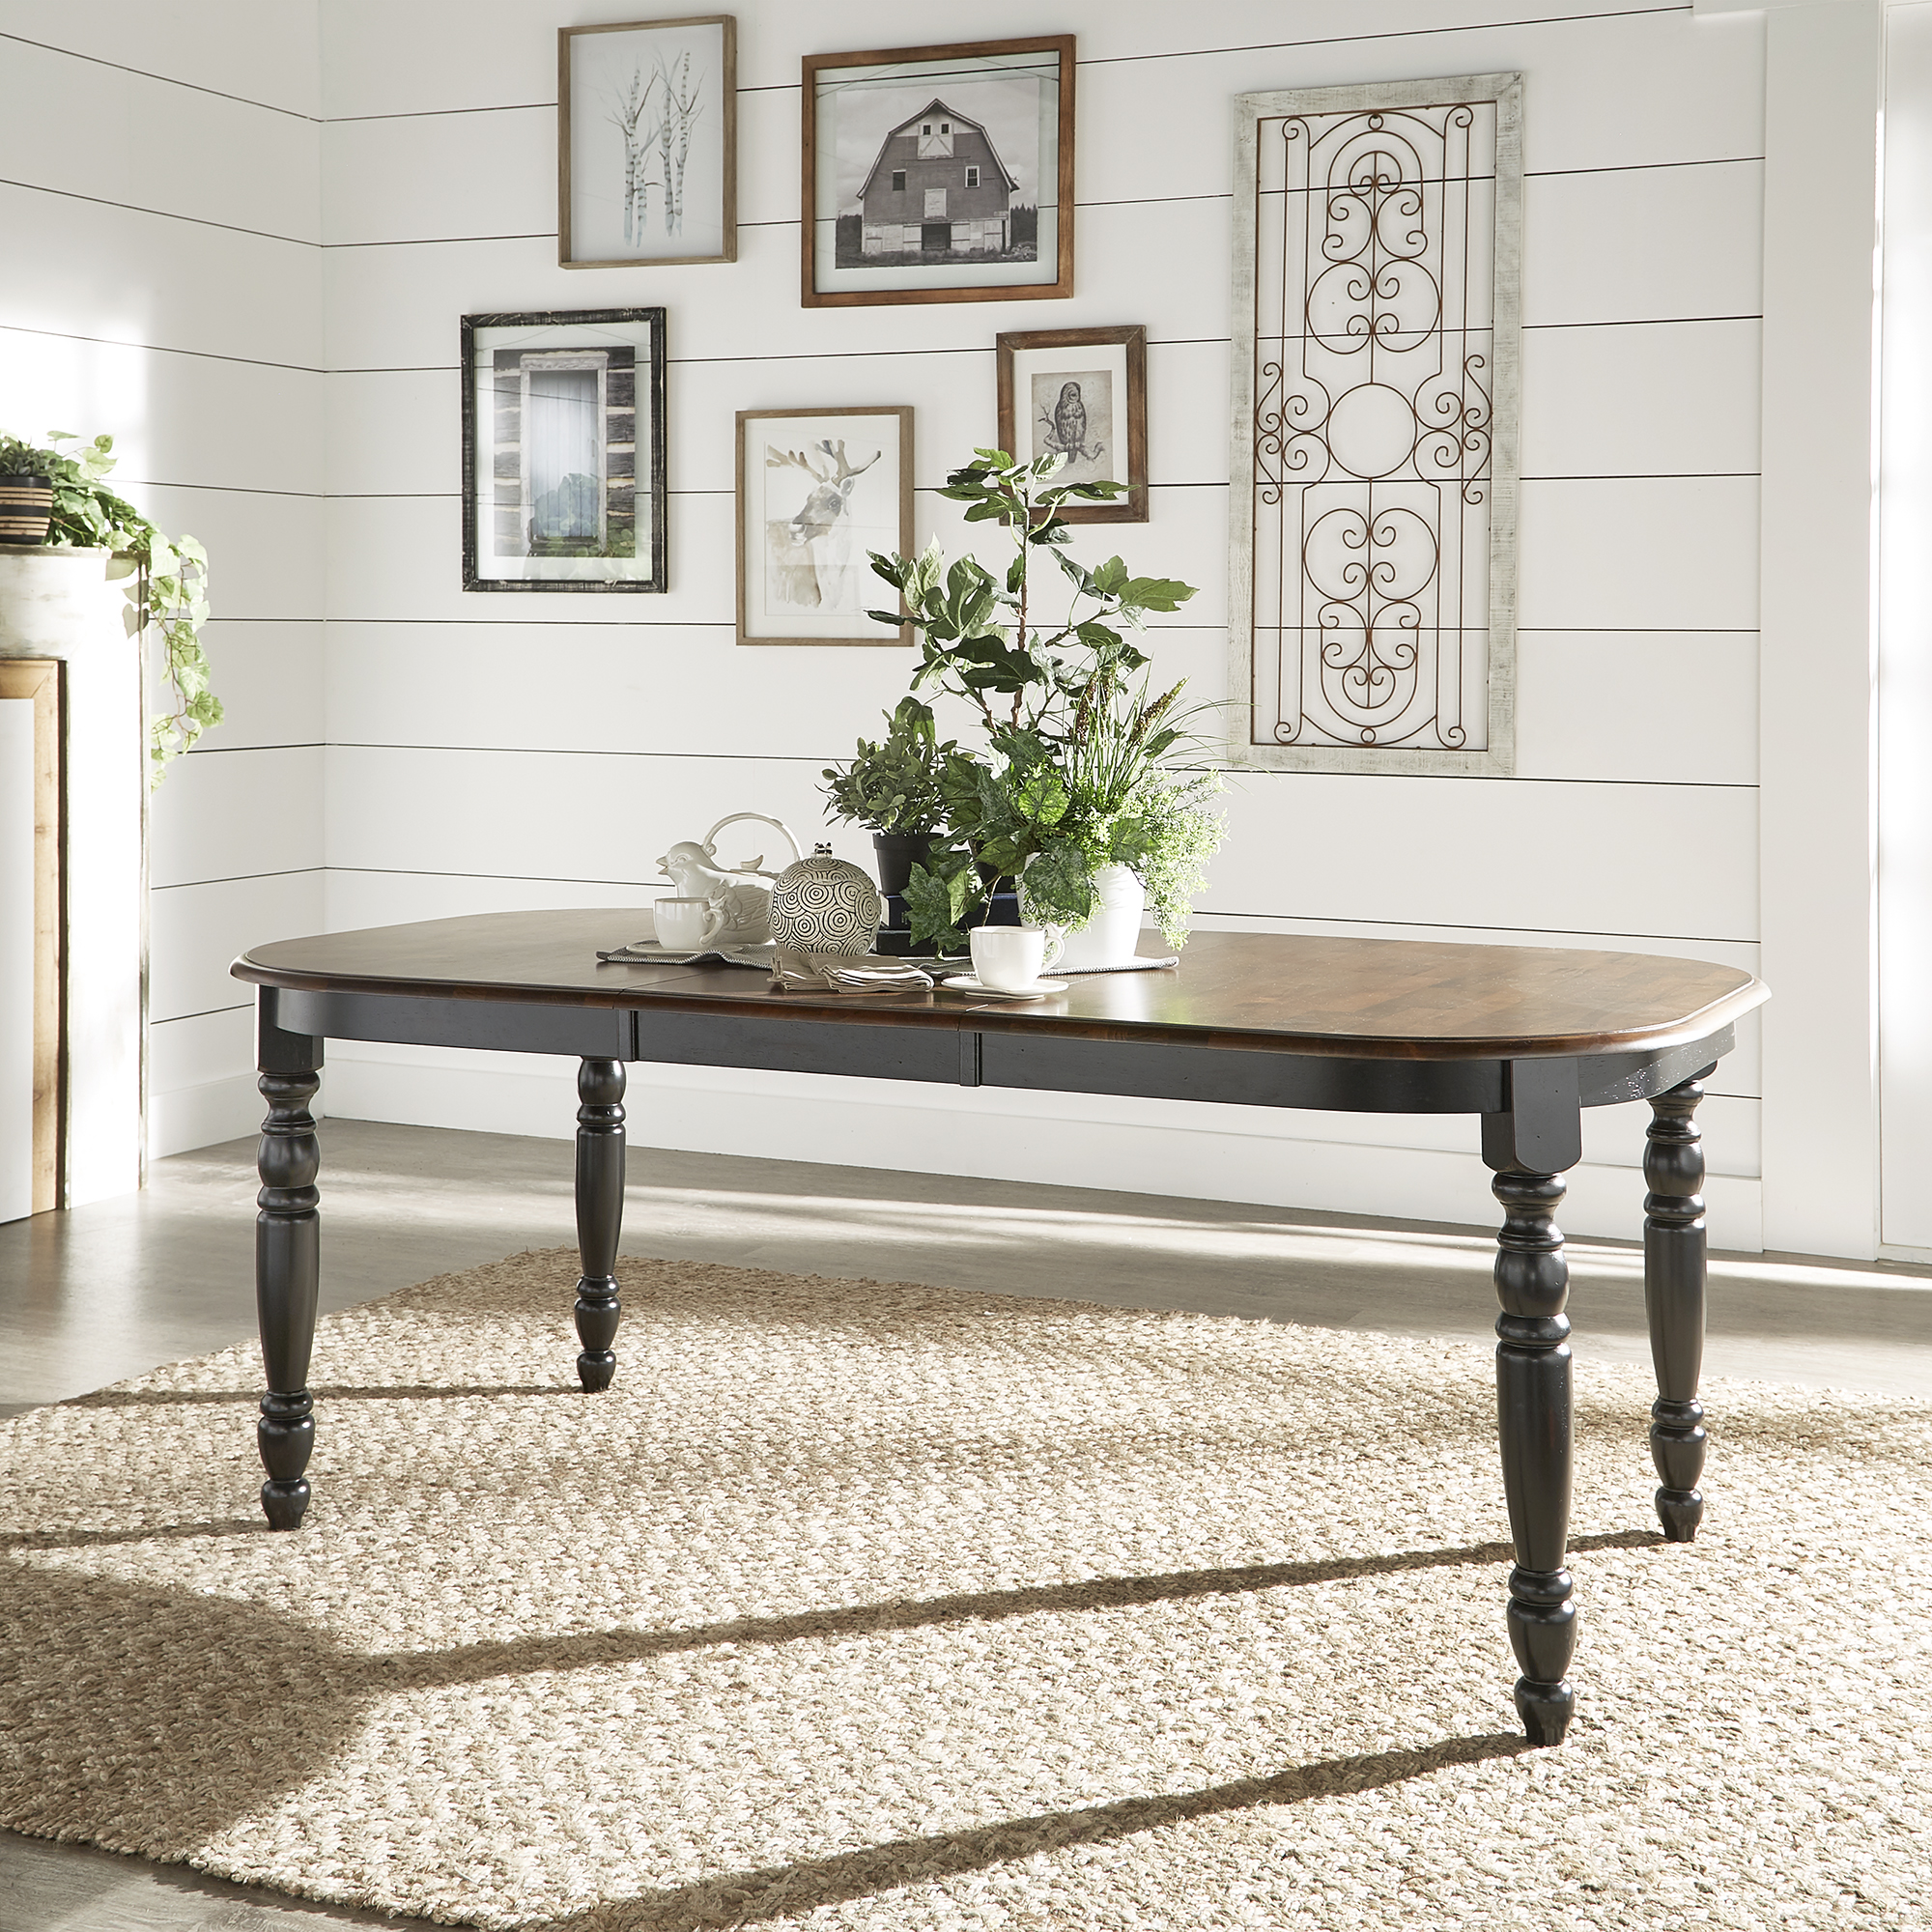 Antique Two-Tone Extending Dining Table